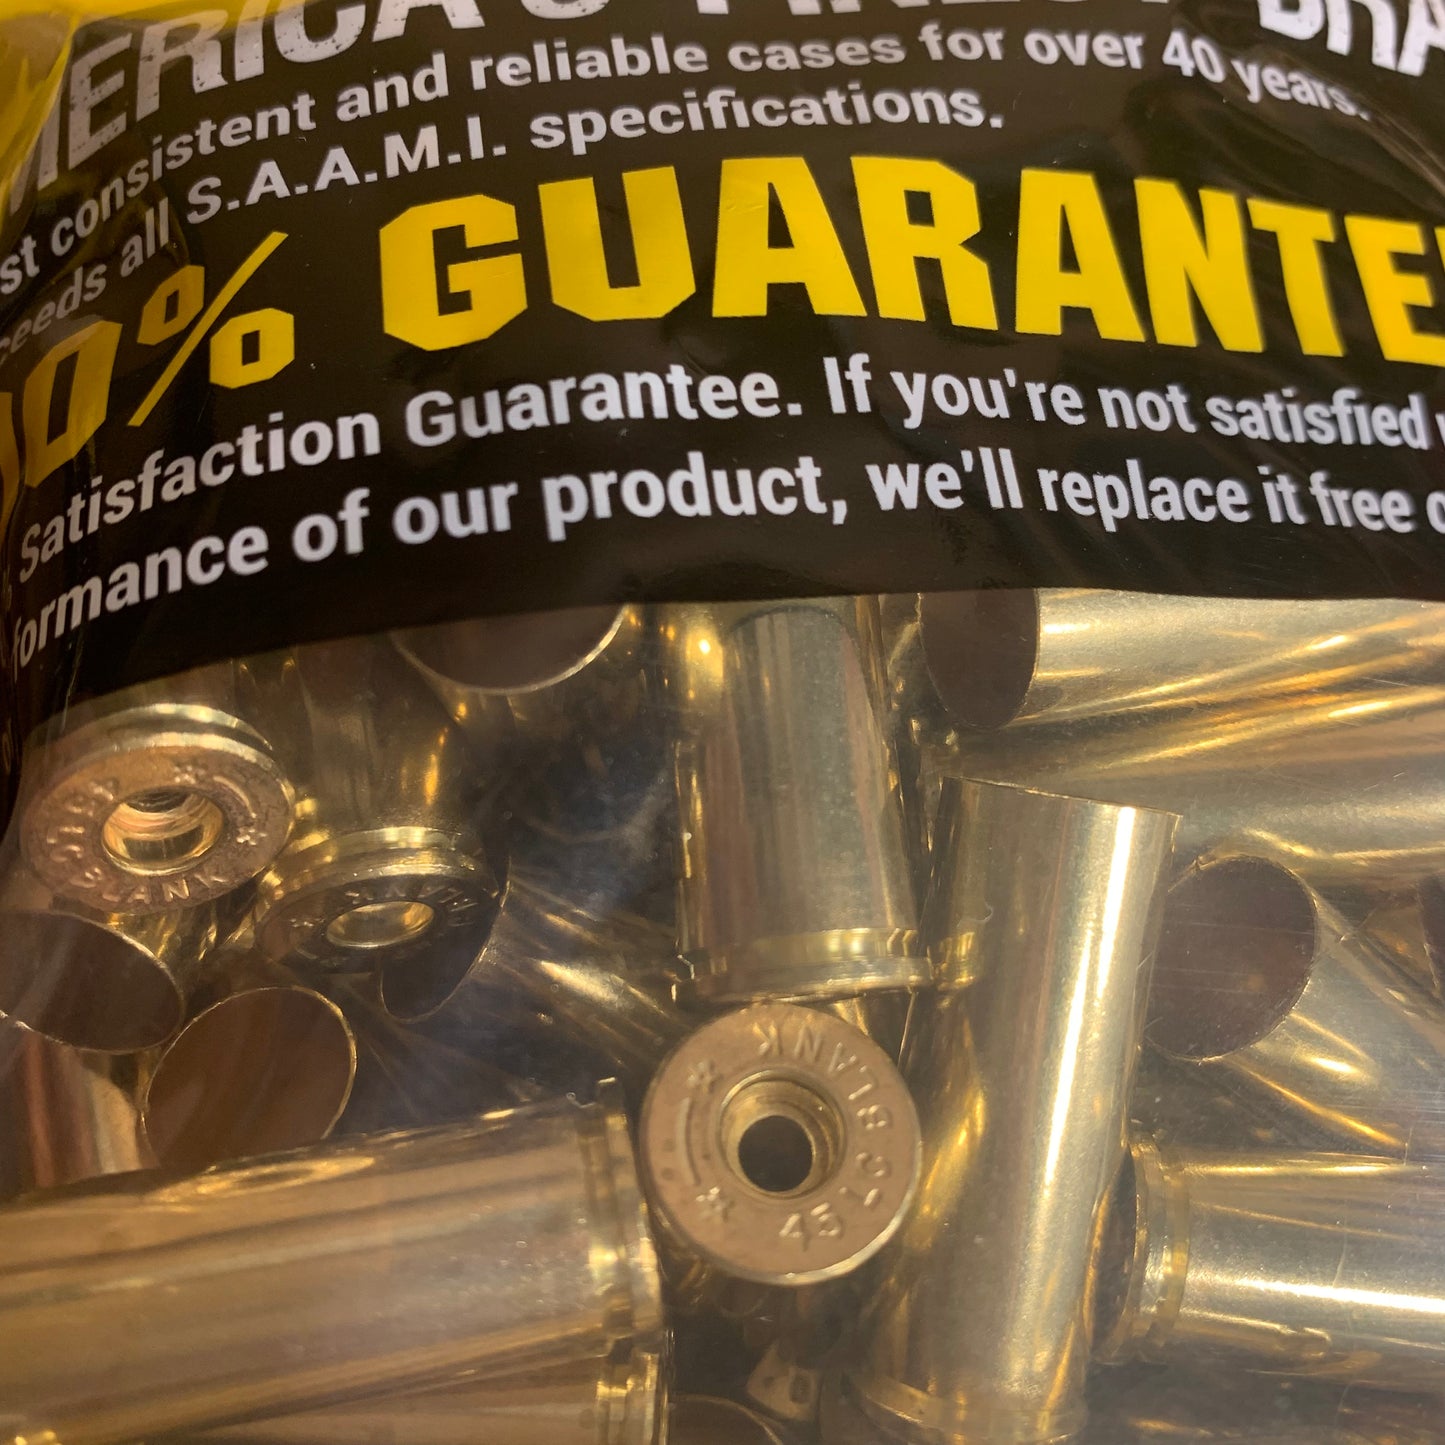 100 Pieces of NEW Starline .45 Long Colt NICKEL PLATED Brass